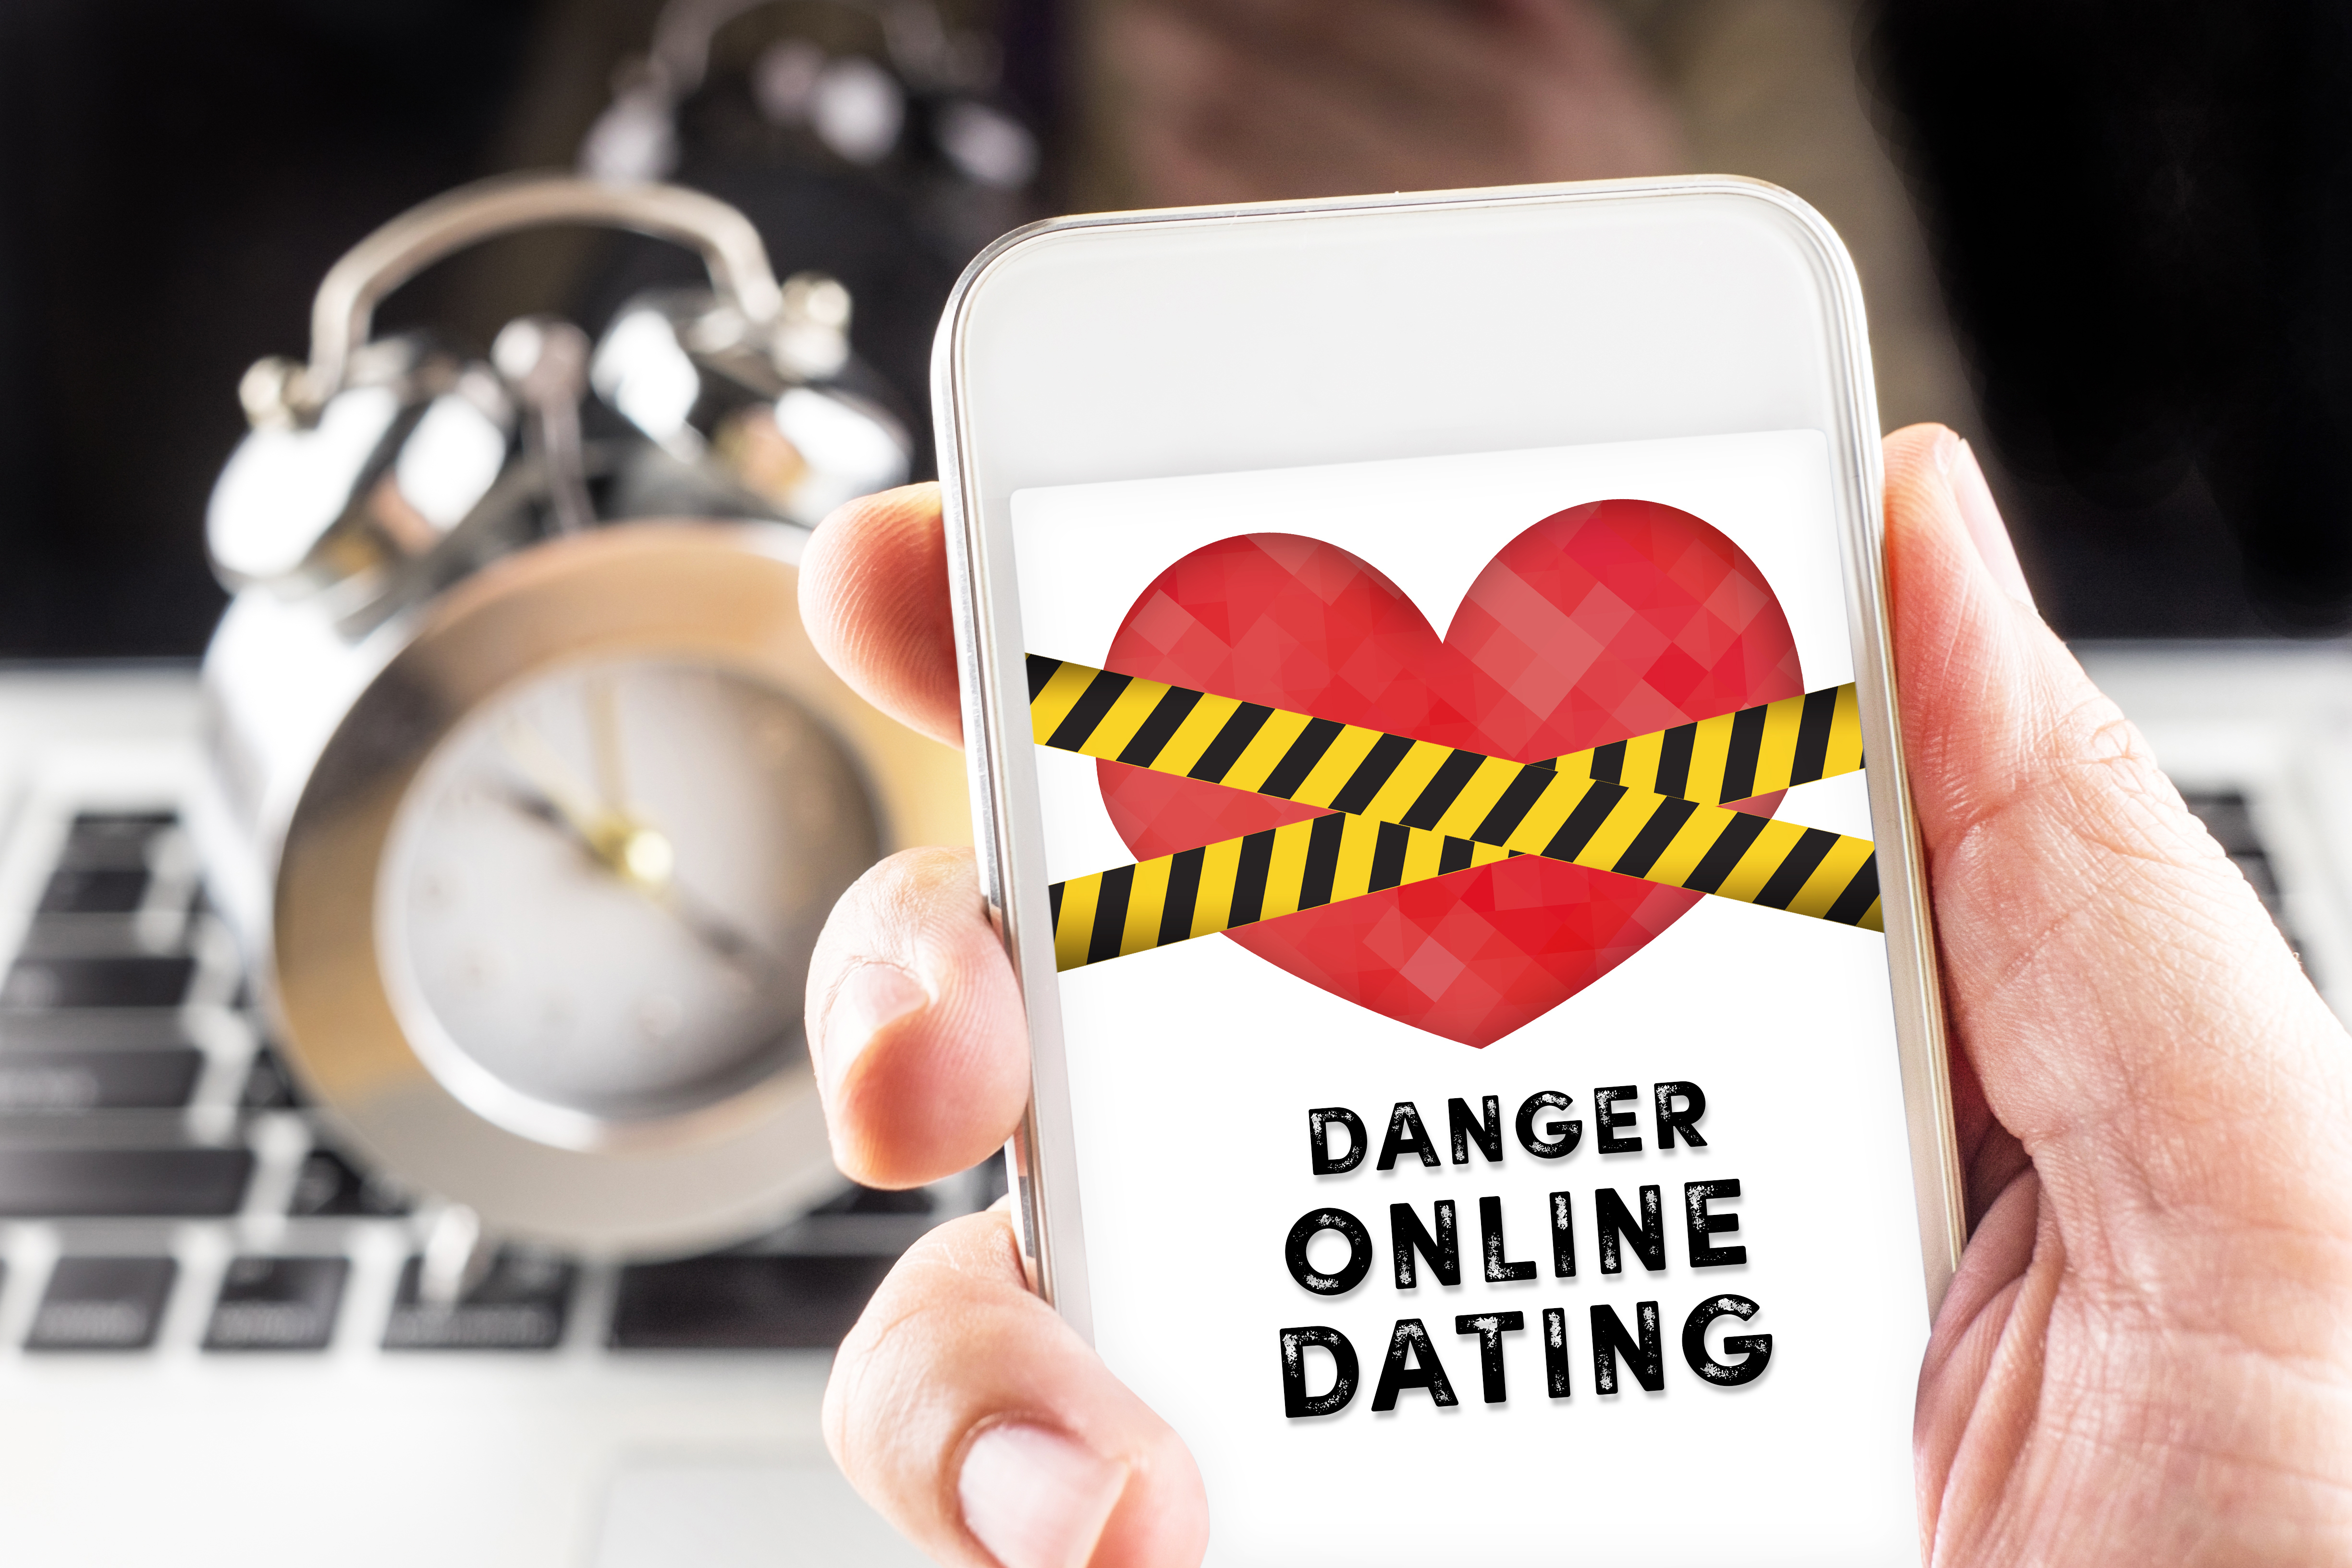 Money scams on dating websites